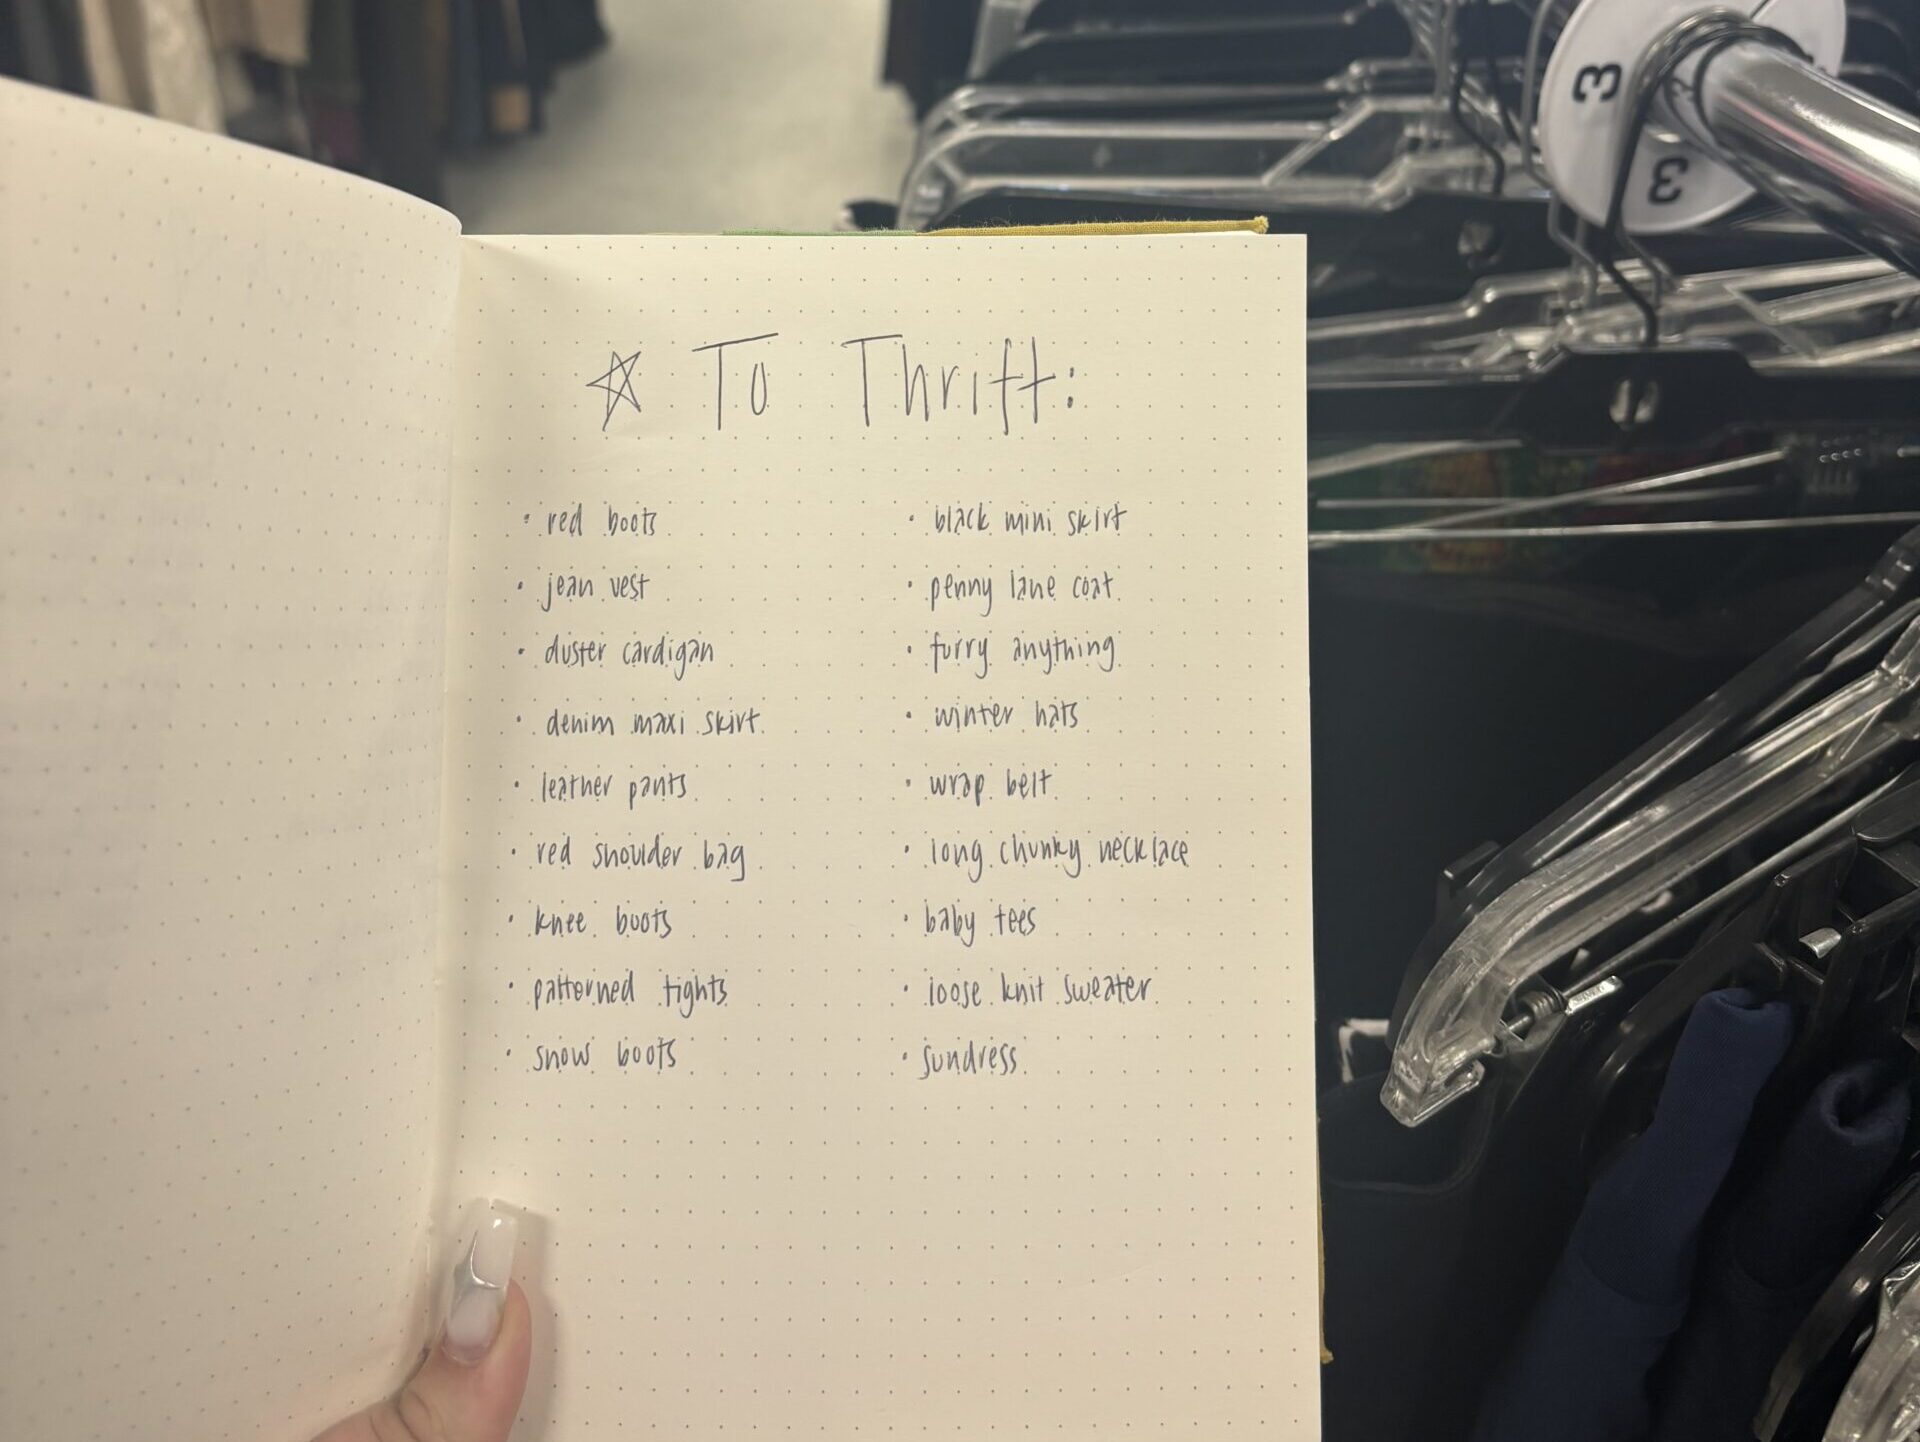 My tips to make the most of every thrift trip